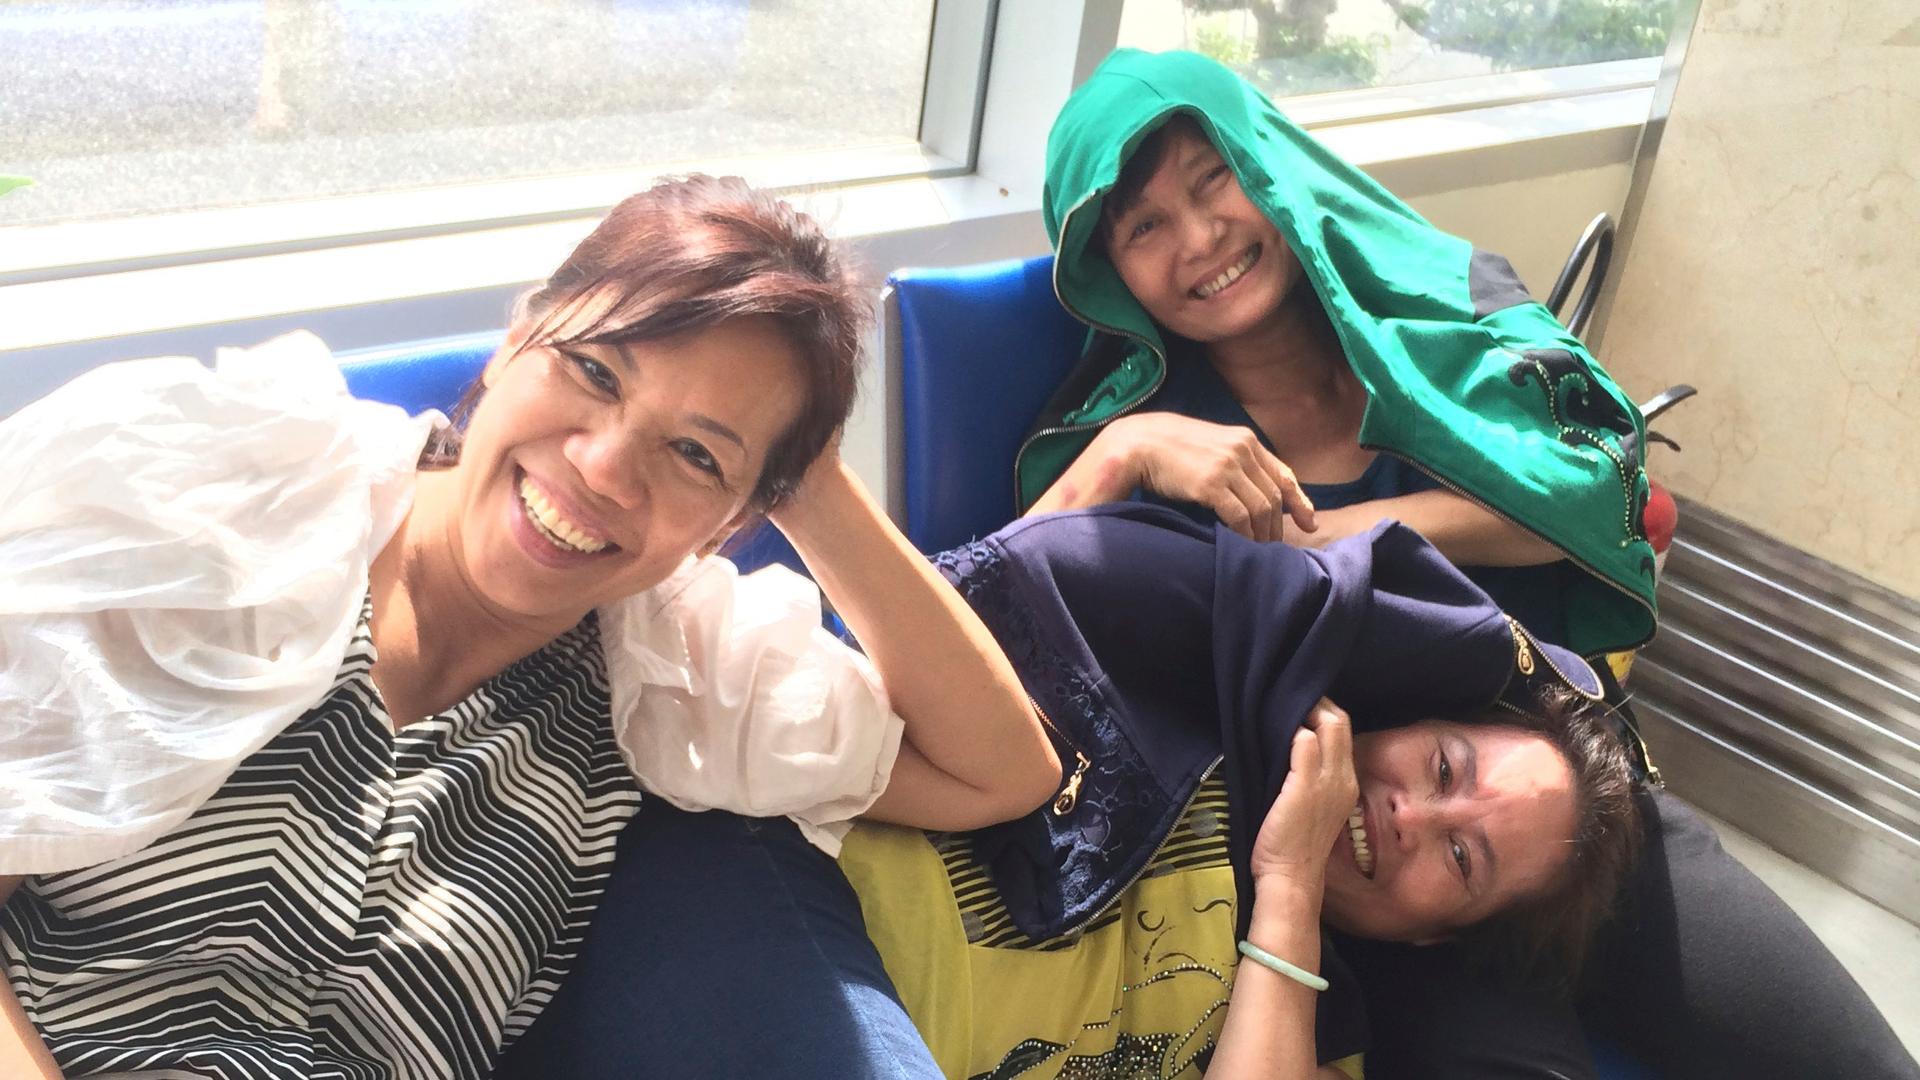 Three women on waiting lounge chairs, smiling.